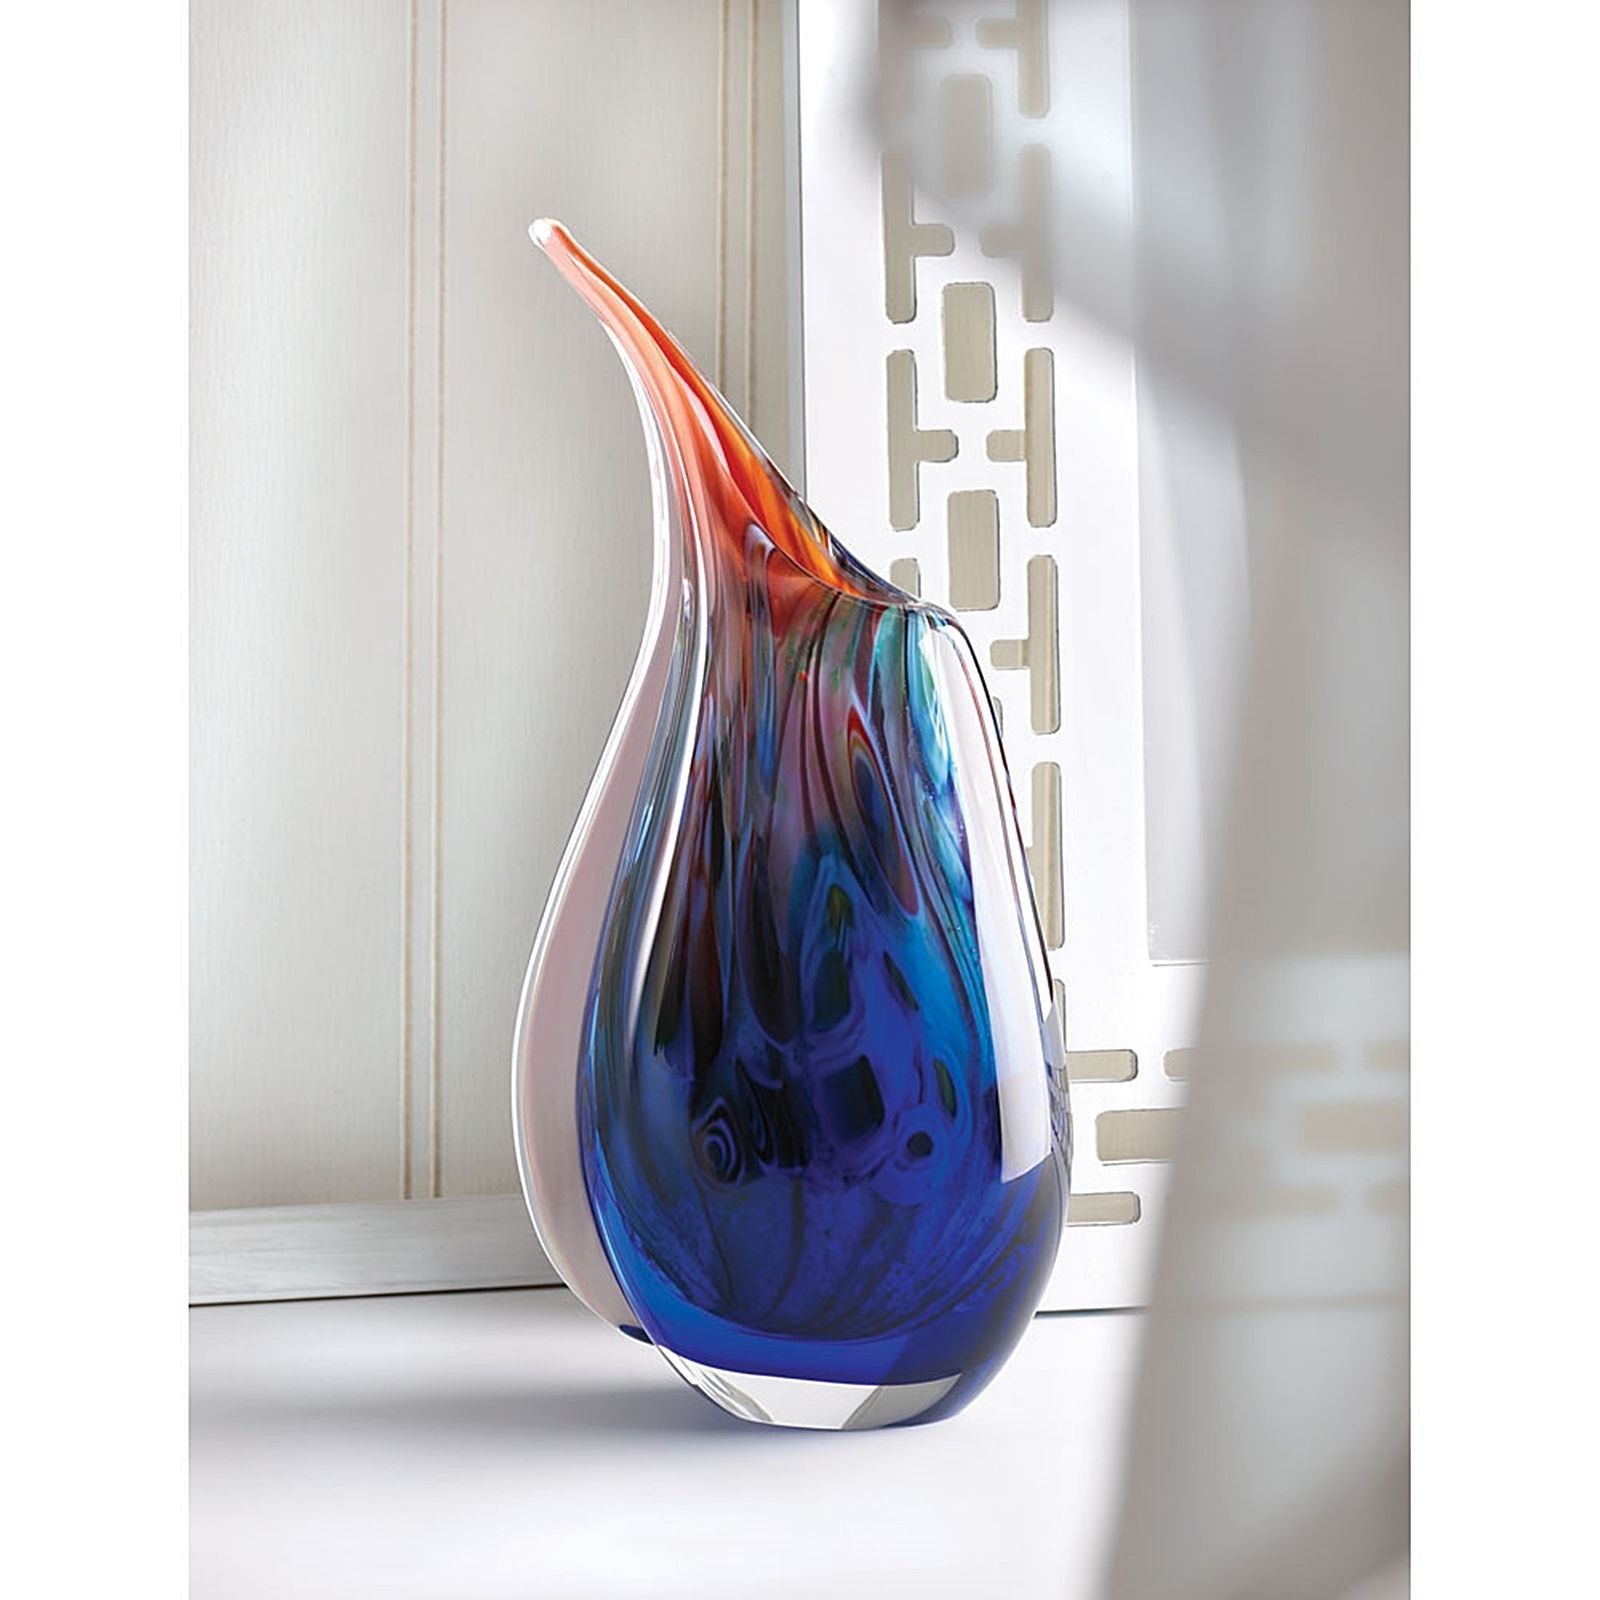 10 Great orange Glass Gems for Vases 2024 free download orange glass gems for vases of the dream artistic glass vase features a splendor of colors captured intended for the dream artistic glass vase features a splendor of colors captured in glass